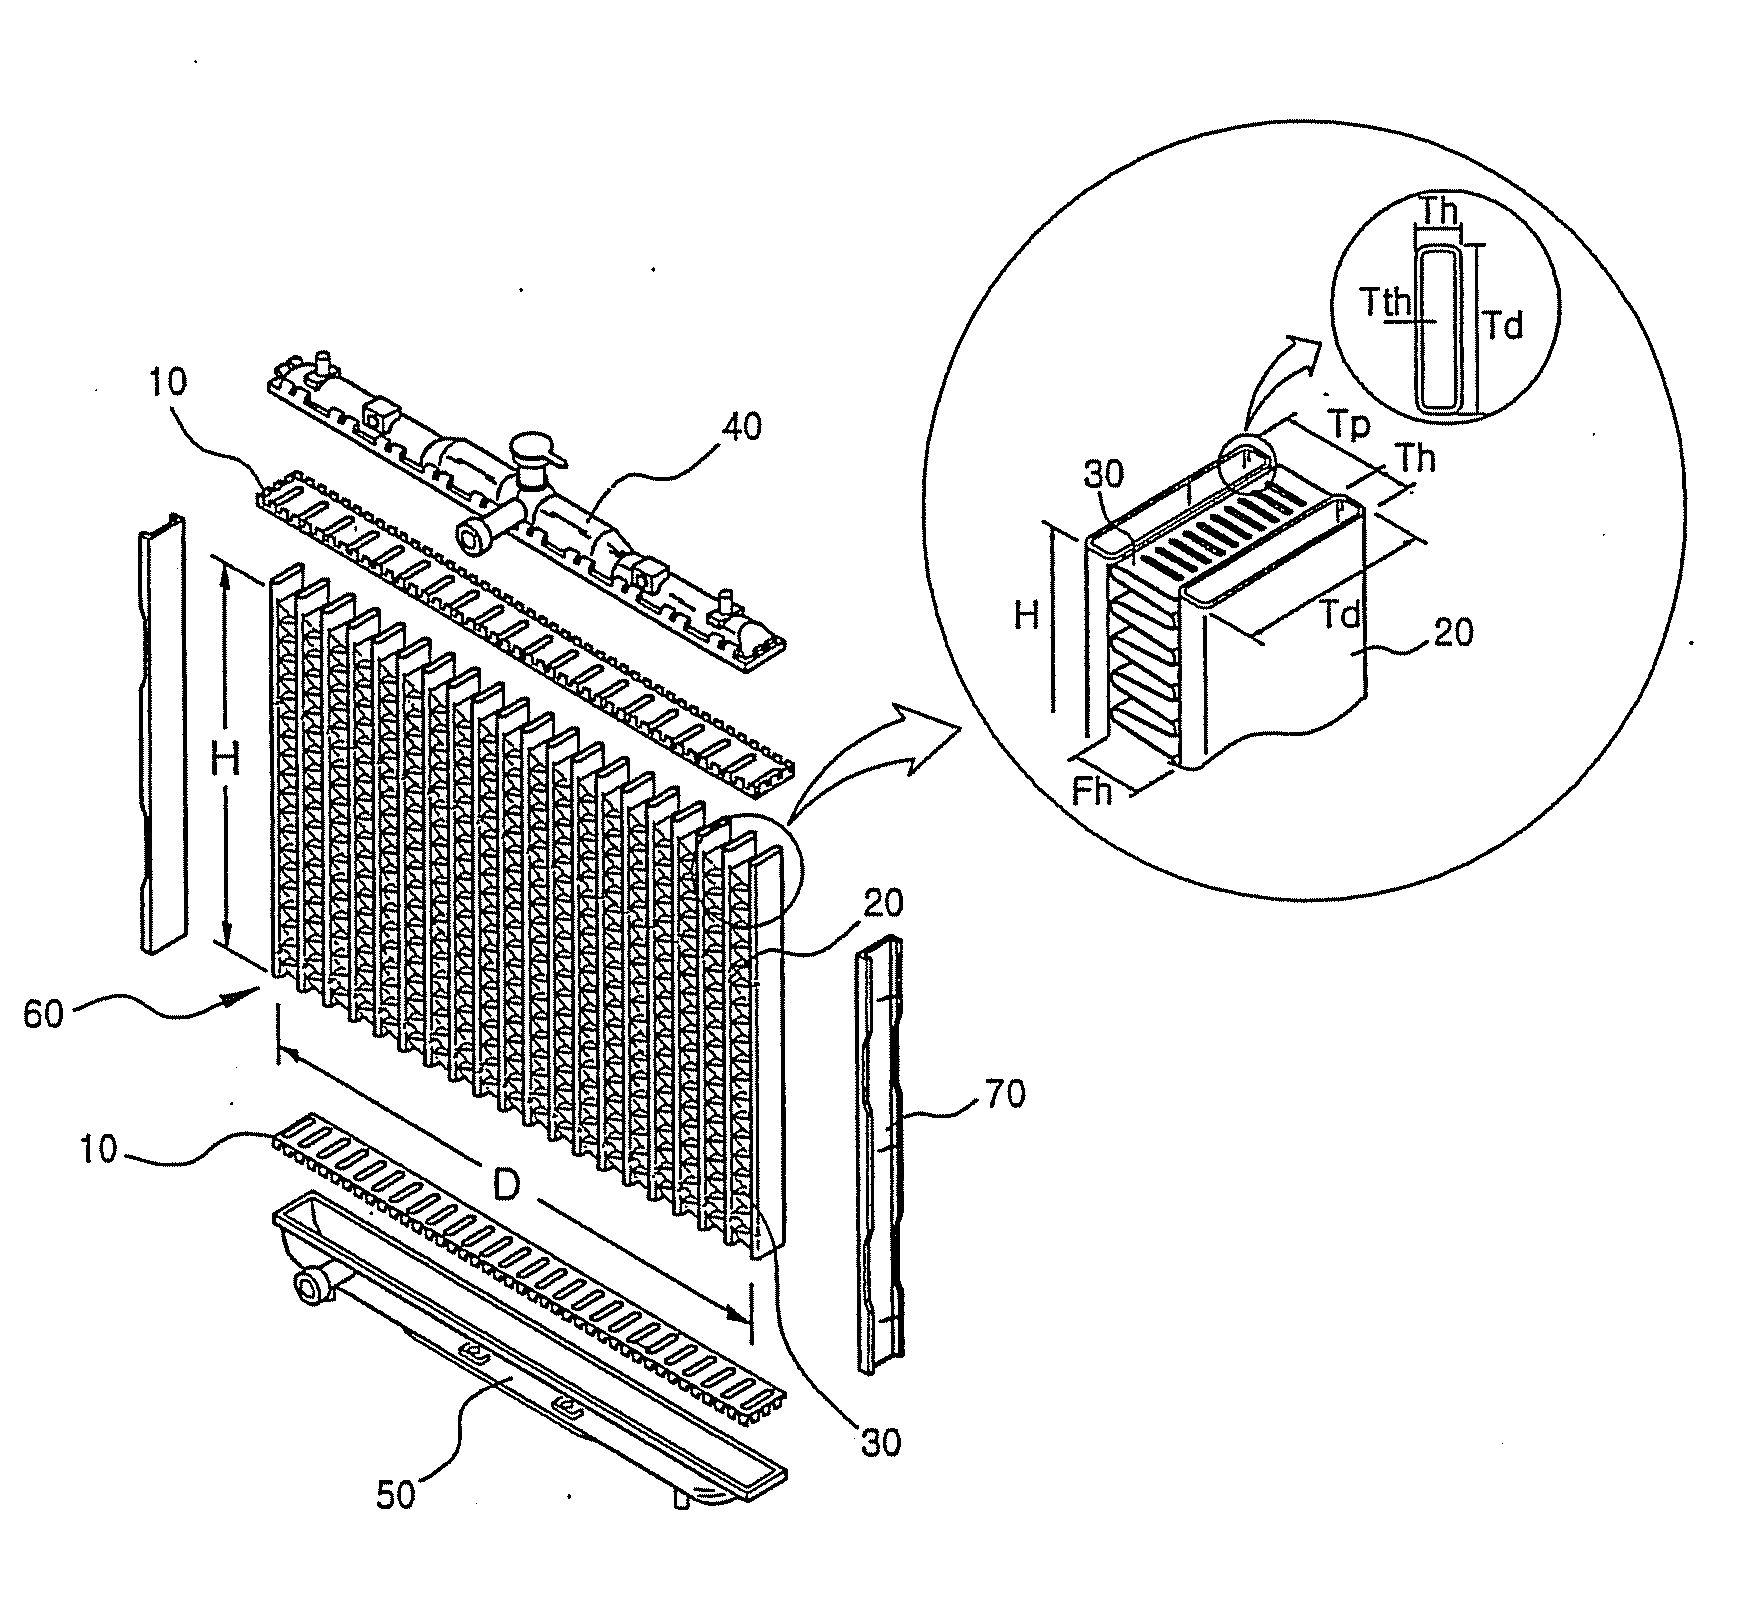 Heat exchanger for a vehicle